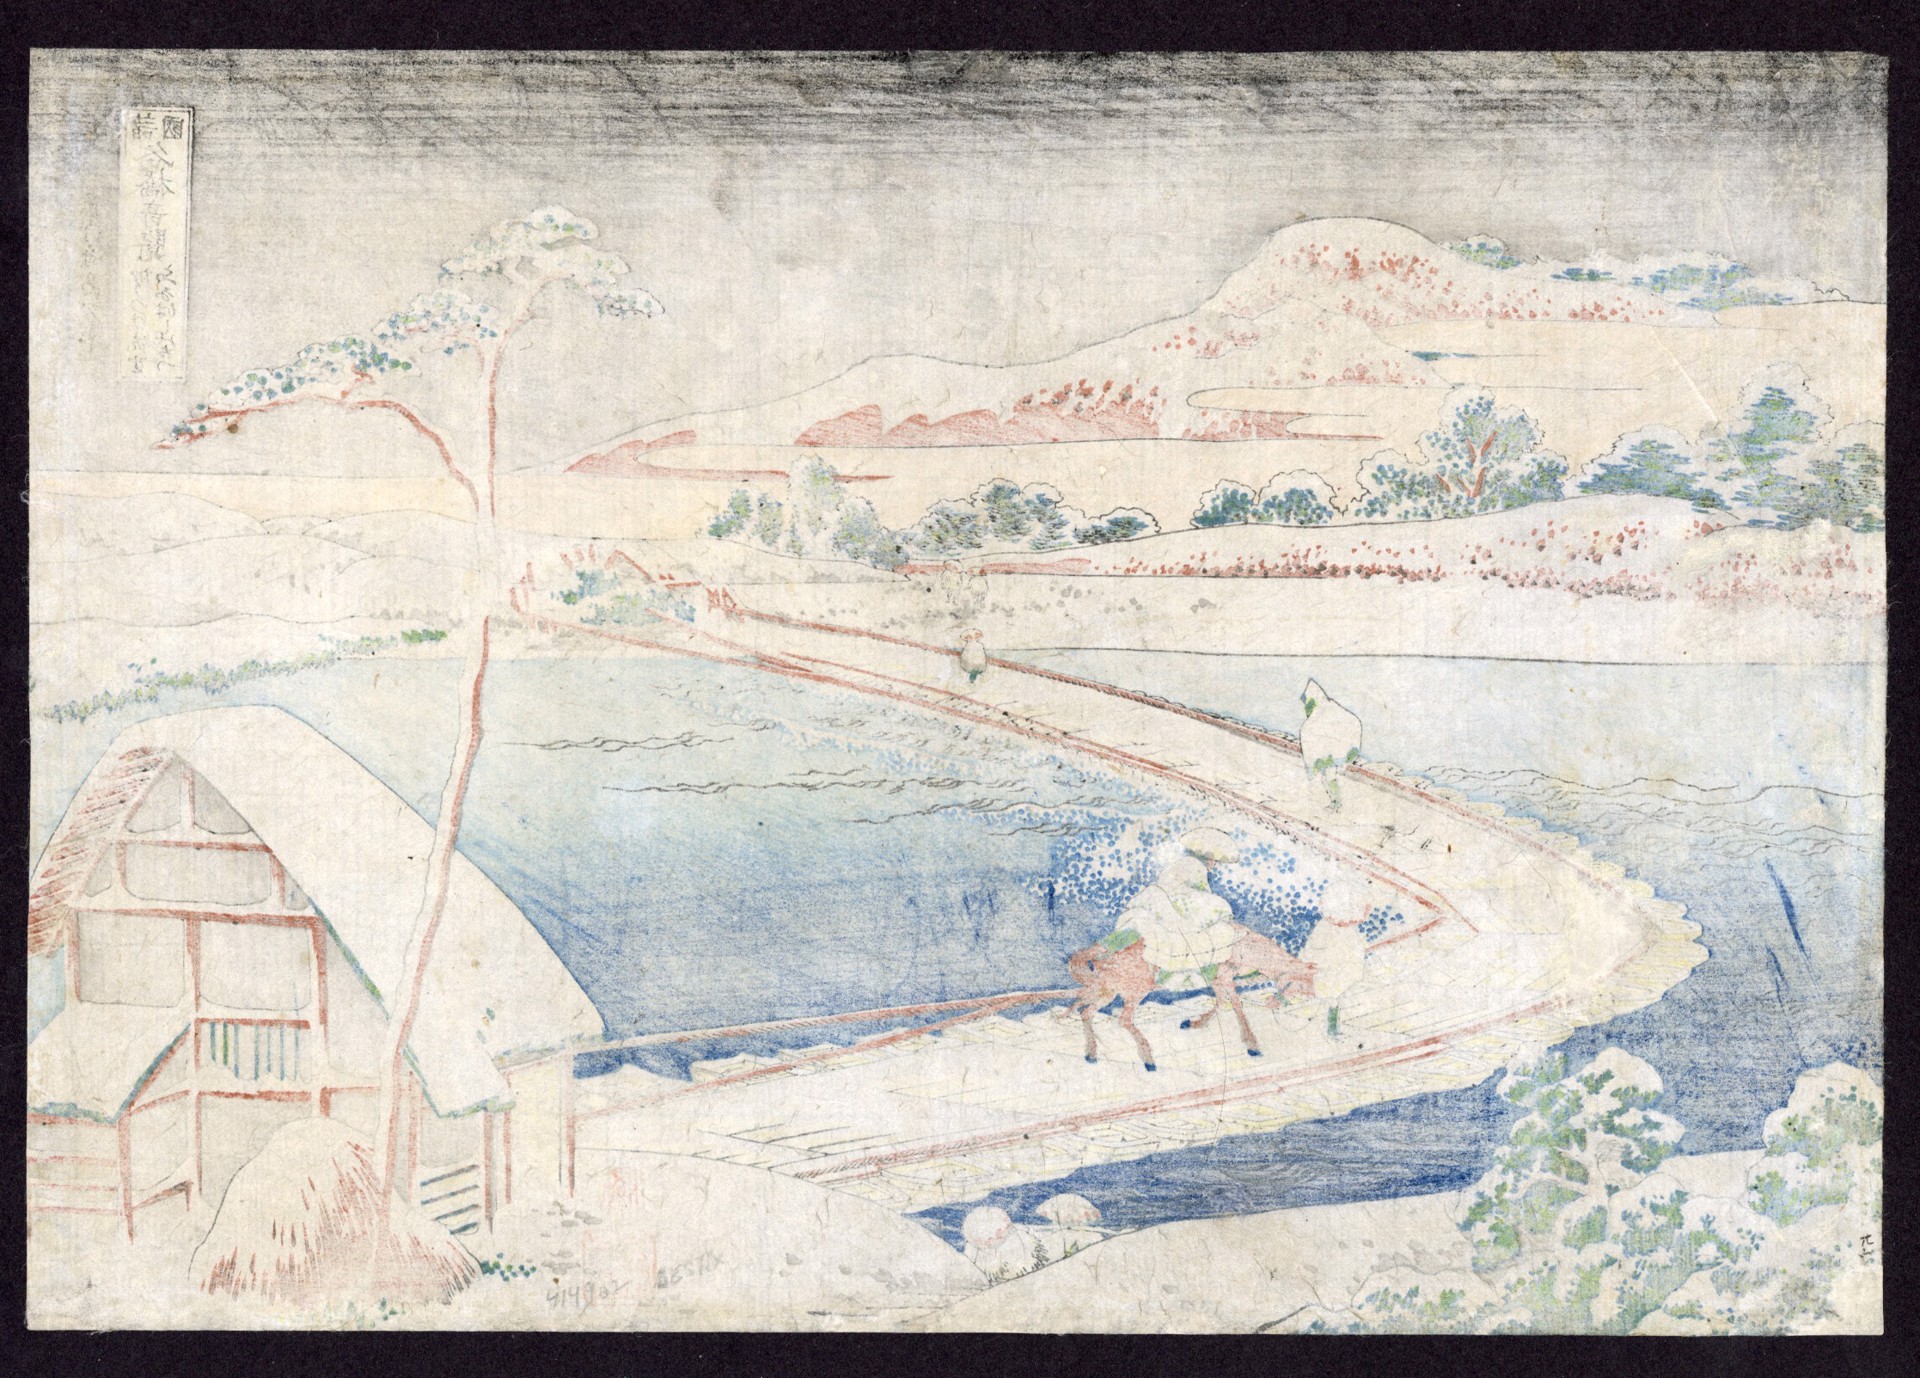 View of the old Boat-bridge  at Sano in Kozuke Province by Hokusai